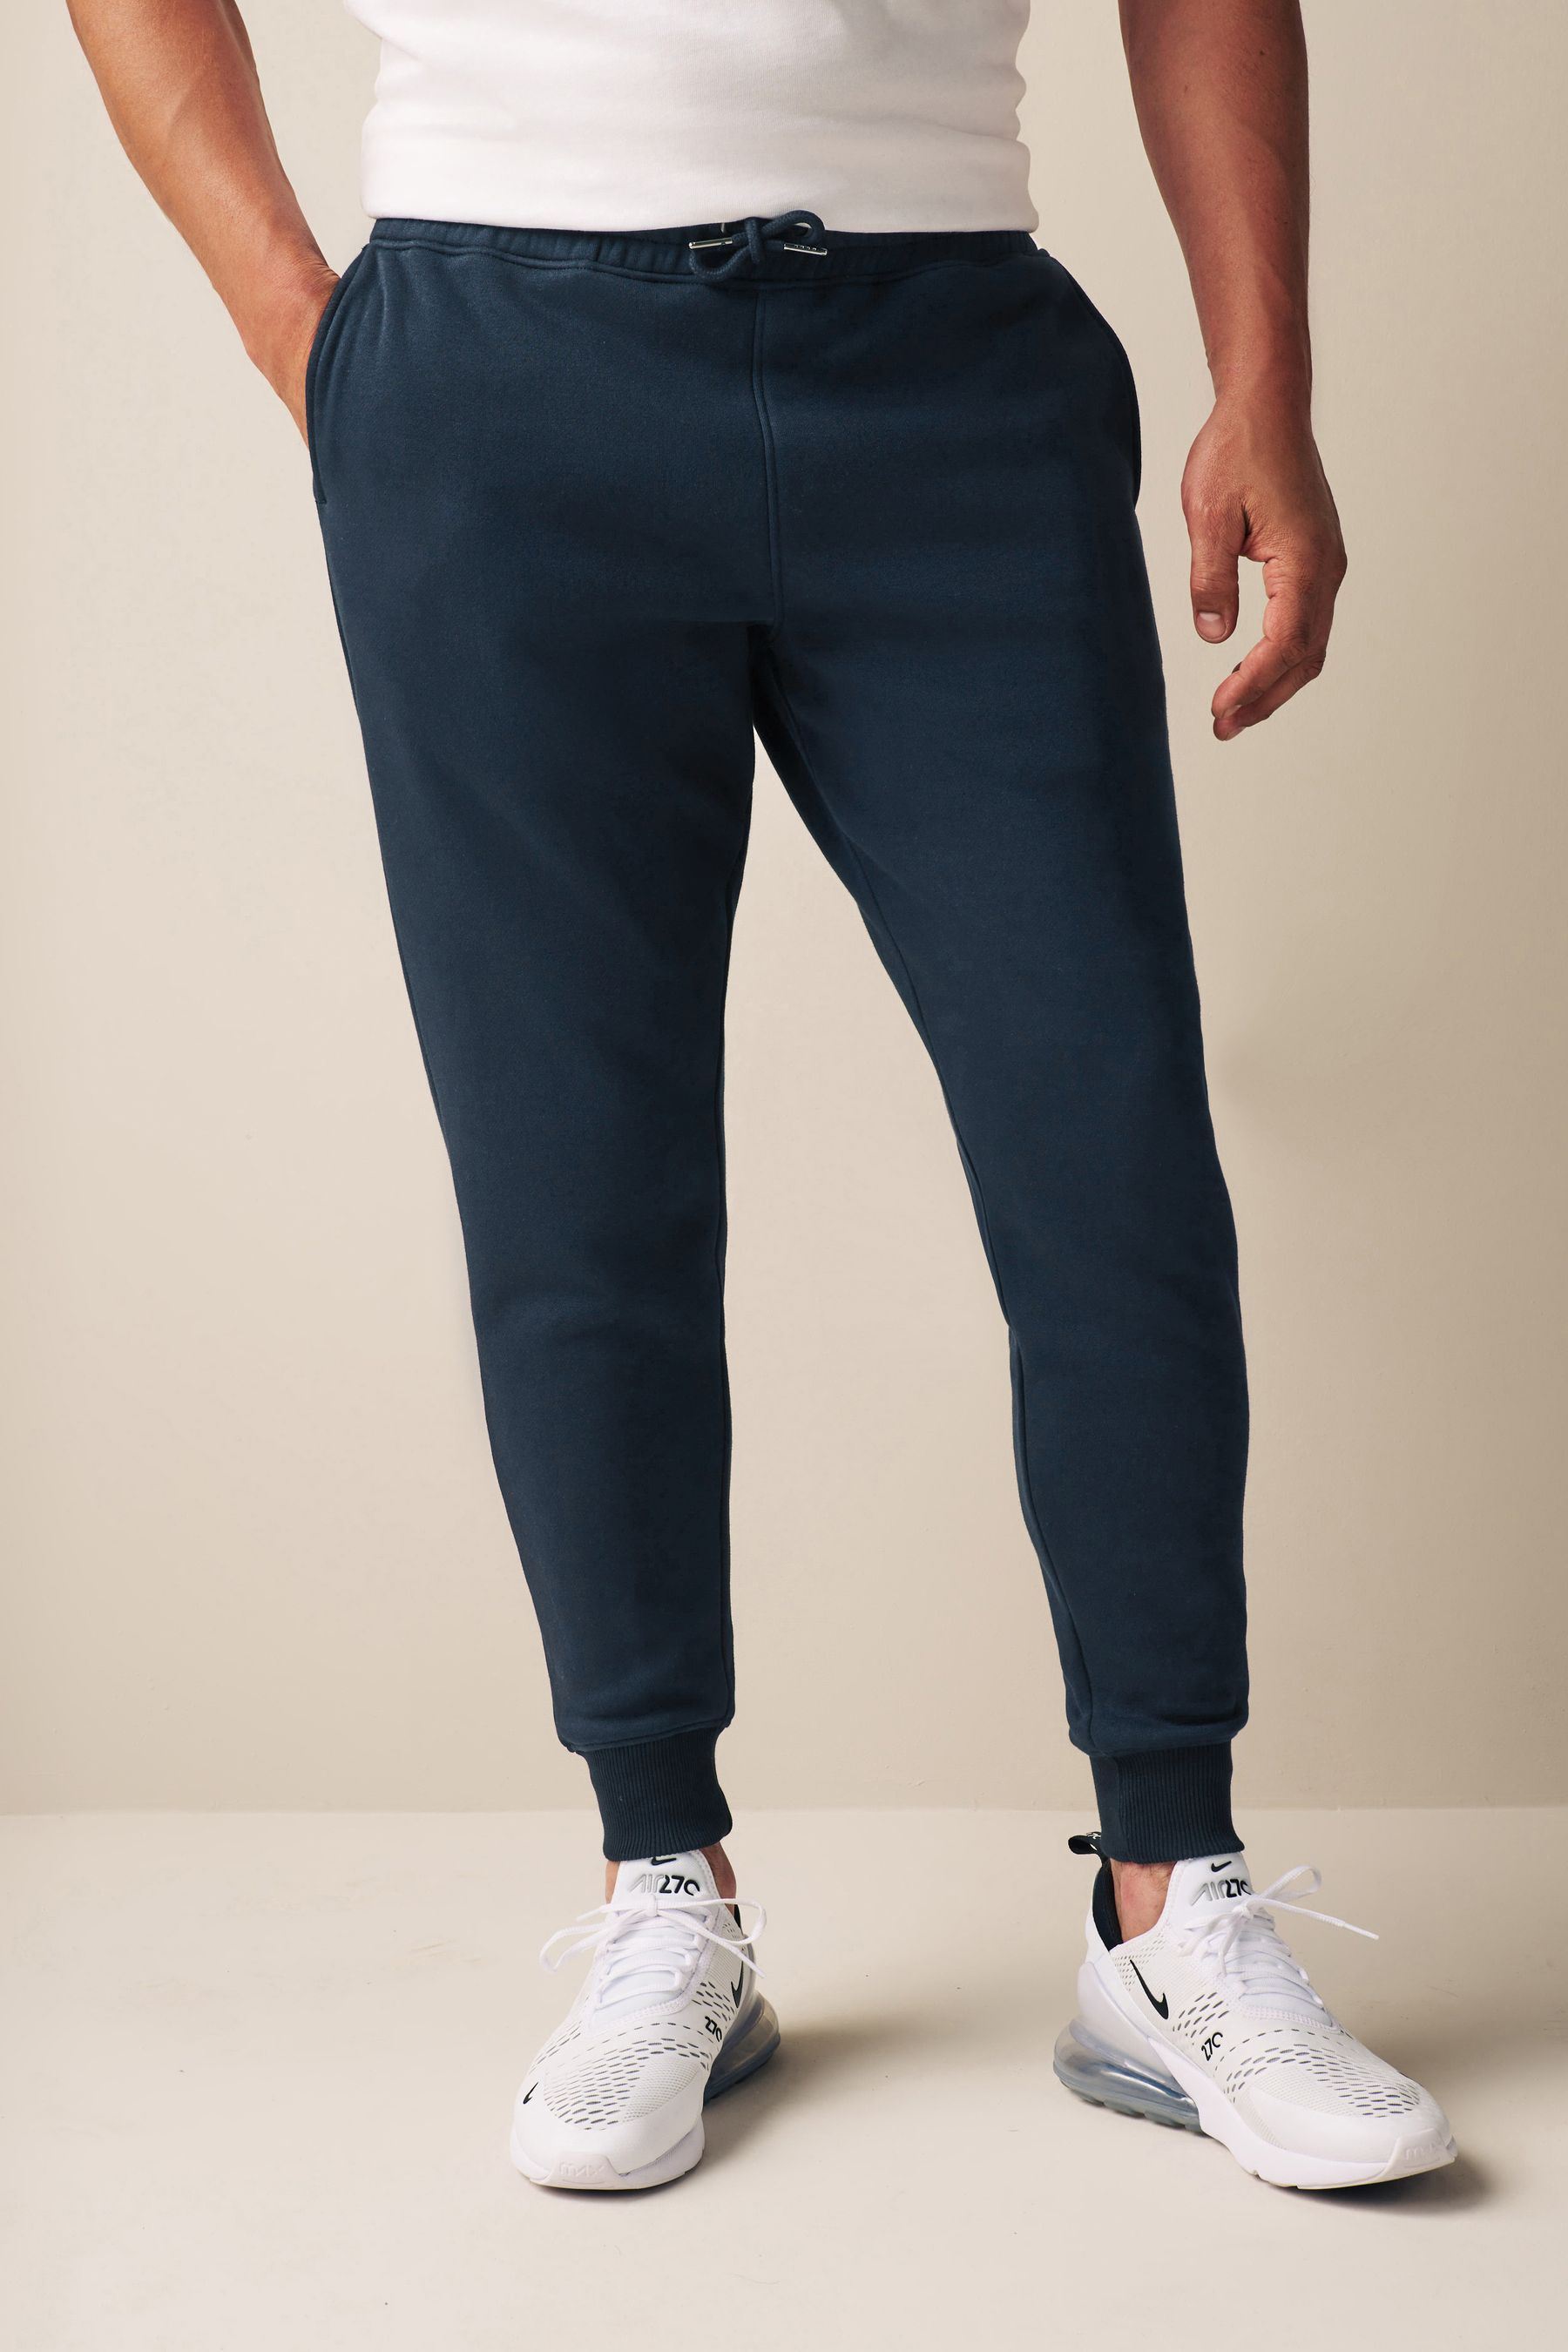 Buy Navy Slim Fit Cotton Blend Cuffed Joggers from the Next UK online shop